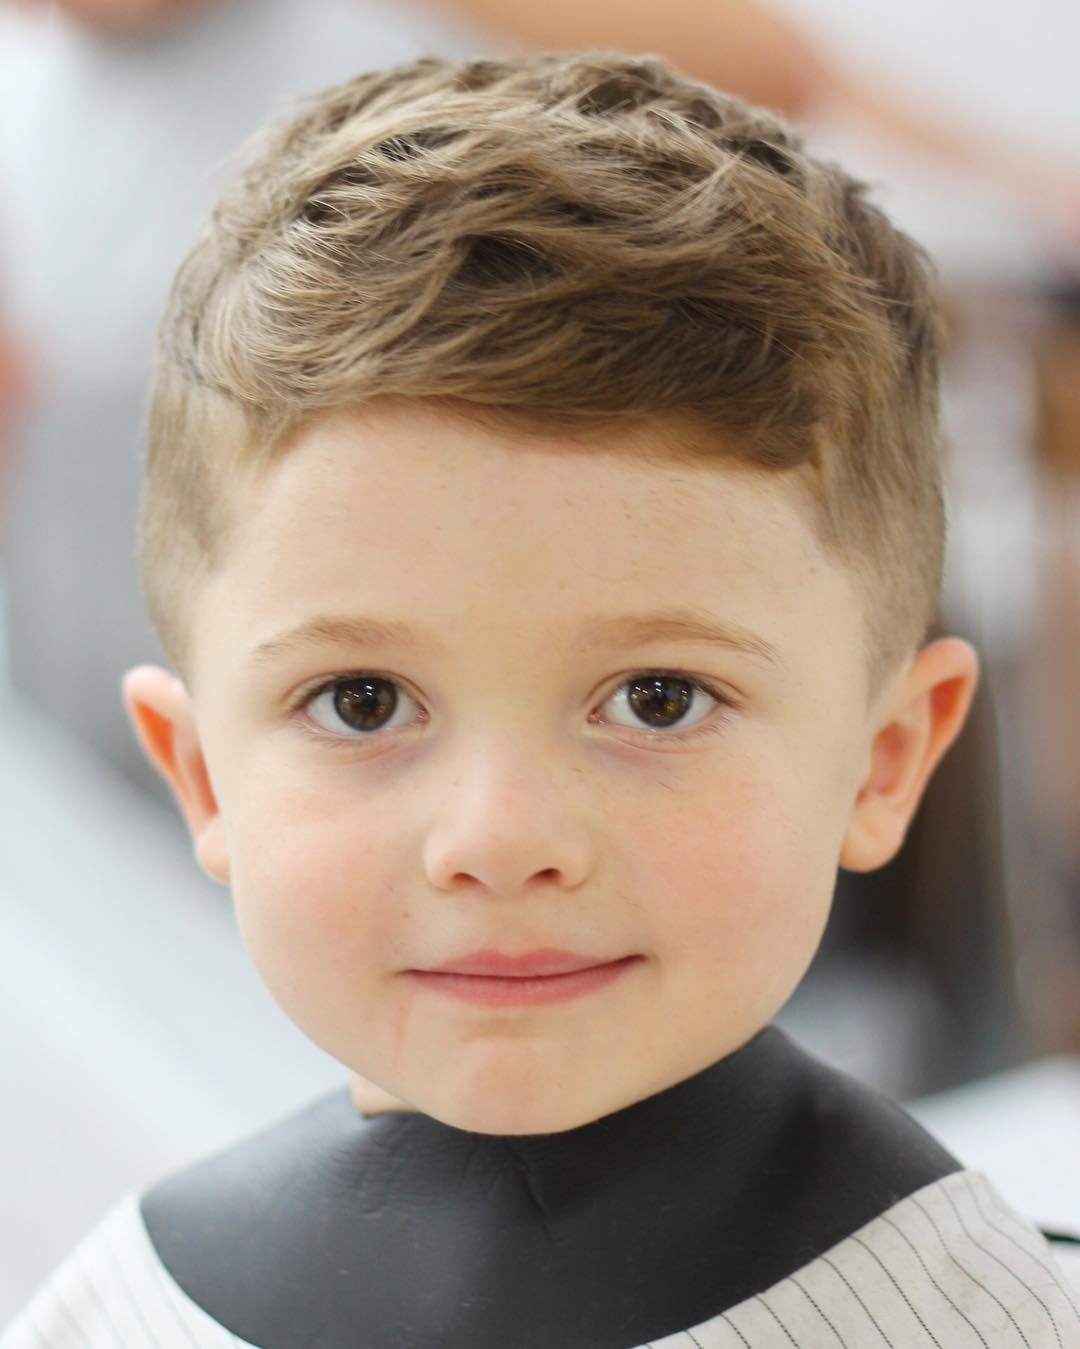 Haircuts For Kids
 Haircut For Round Face Toddler – Wavy Haircut